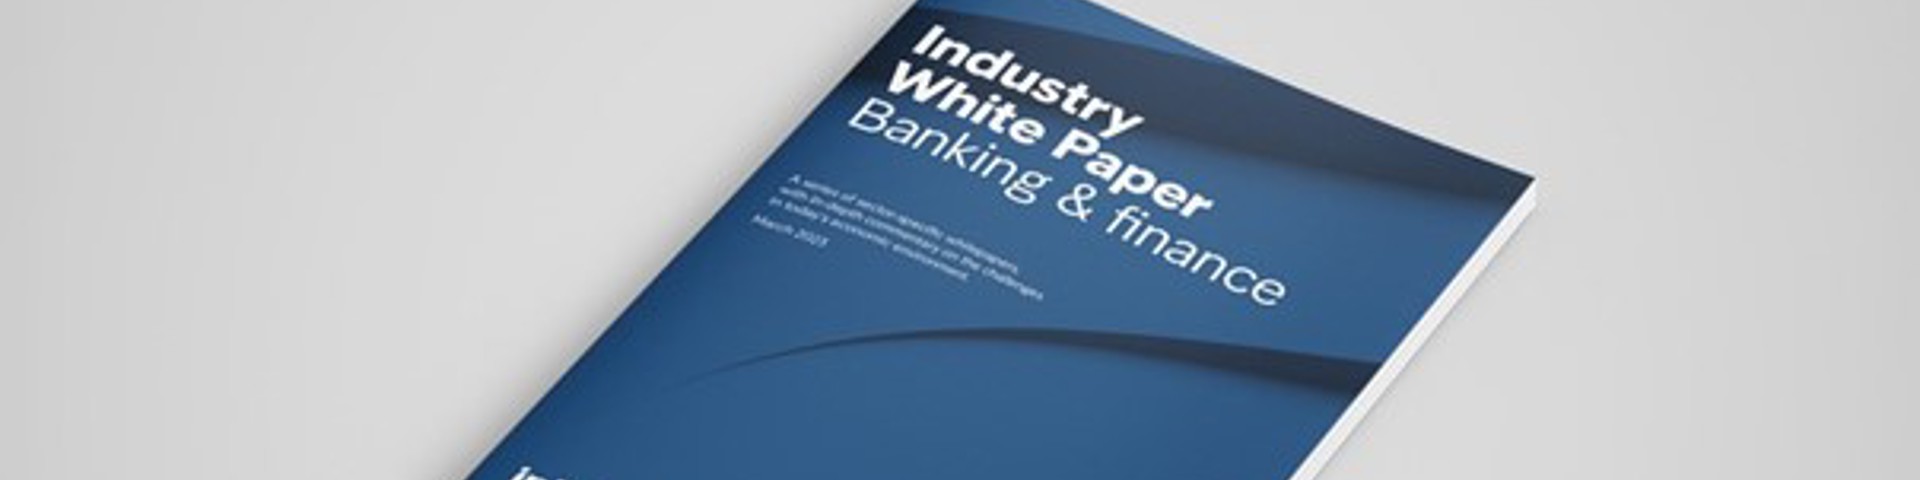 Industry White Papers 2023 - Bankowość i Finanse